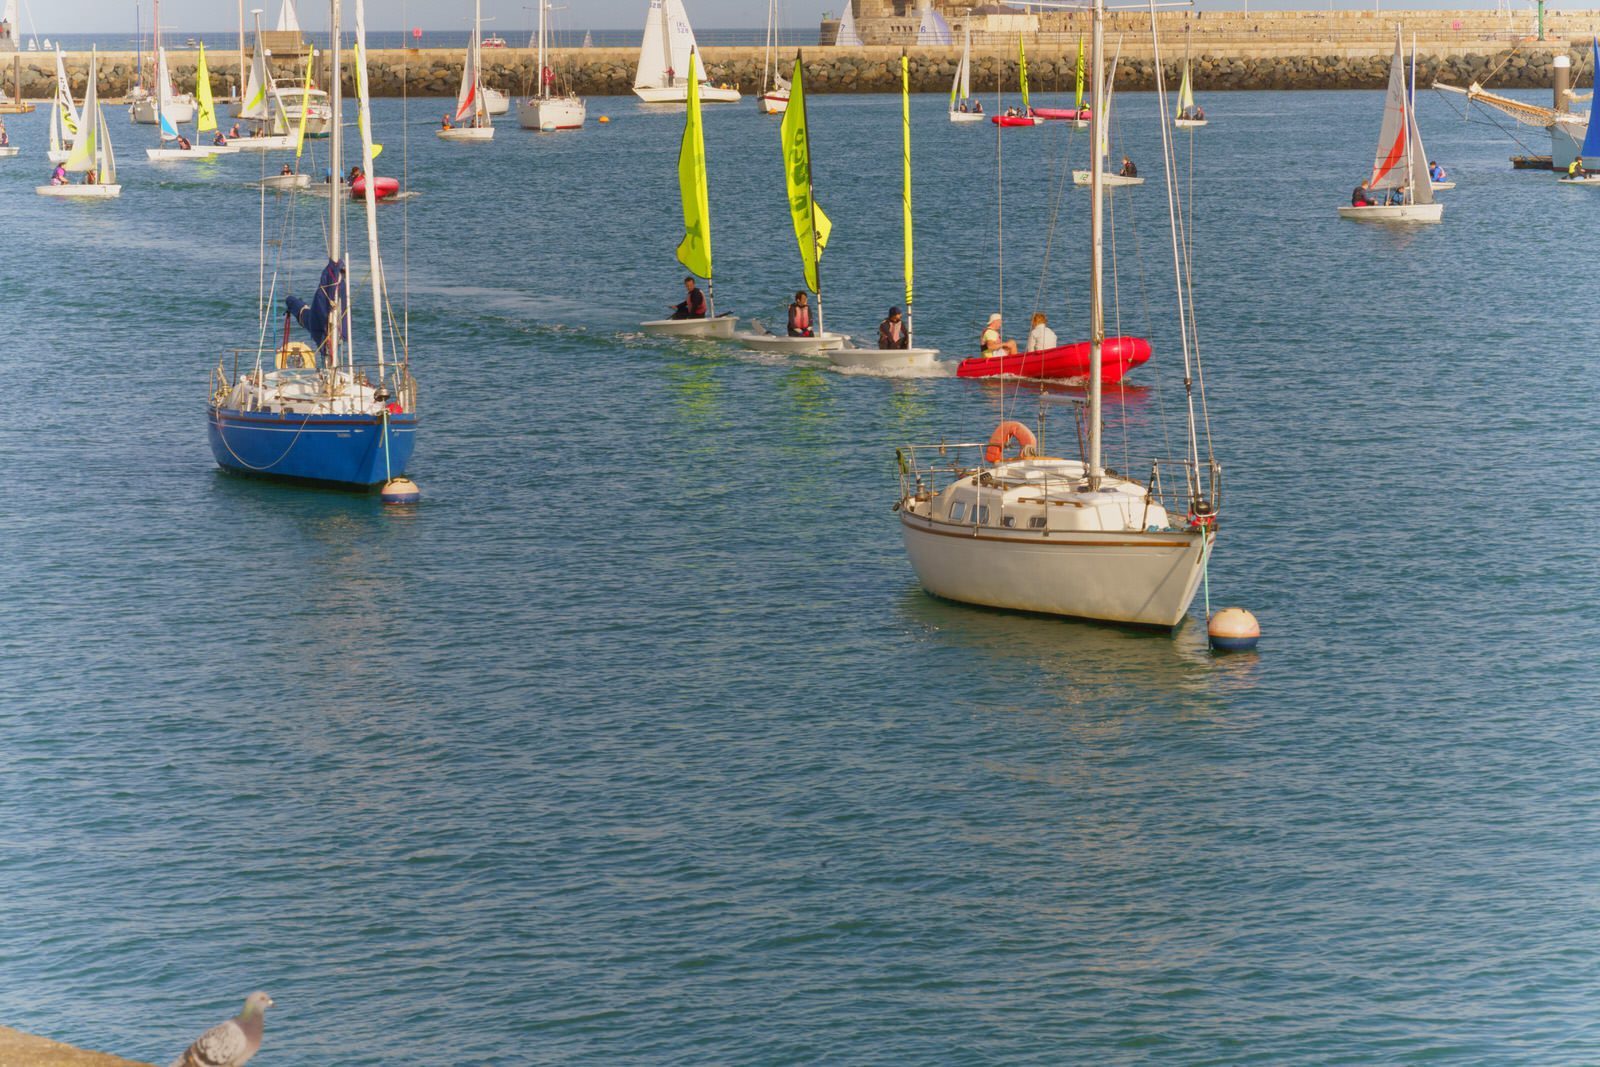 learning to sail, west pier, Dun Laoghaire,Irish National Sailing & Powerboat School,scenic venue,many amenities,Ireland, William Murphy, Sony, A7RIV, 70-20mm lens, 002